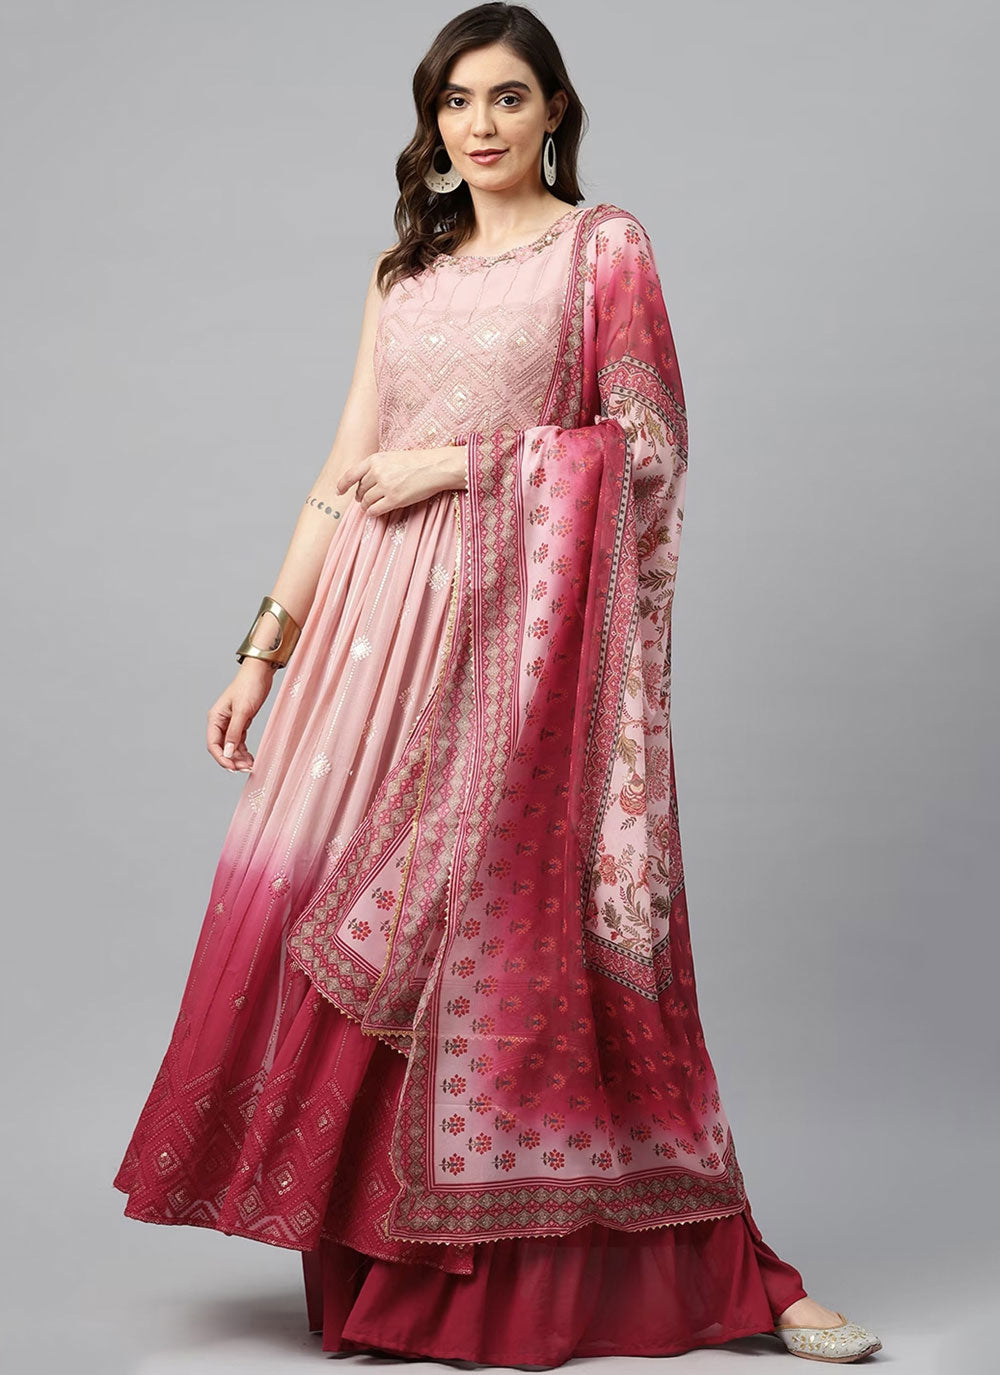 Embroidered Work Georgette Readymade Salwar Suit In Peach And Pink For Ceremonial